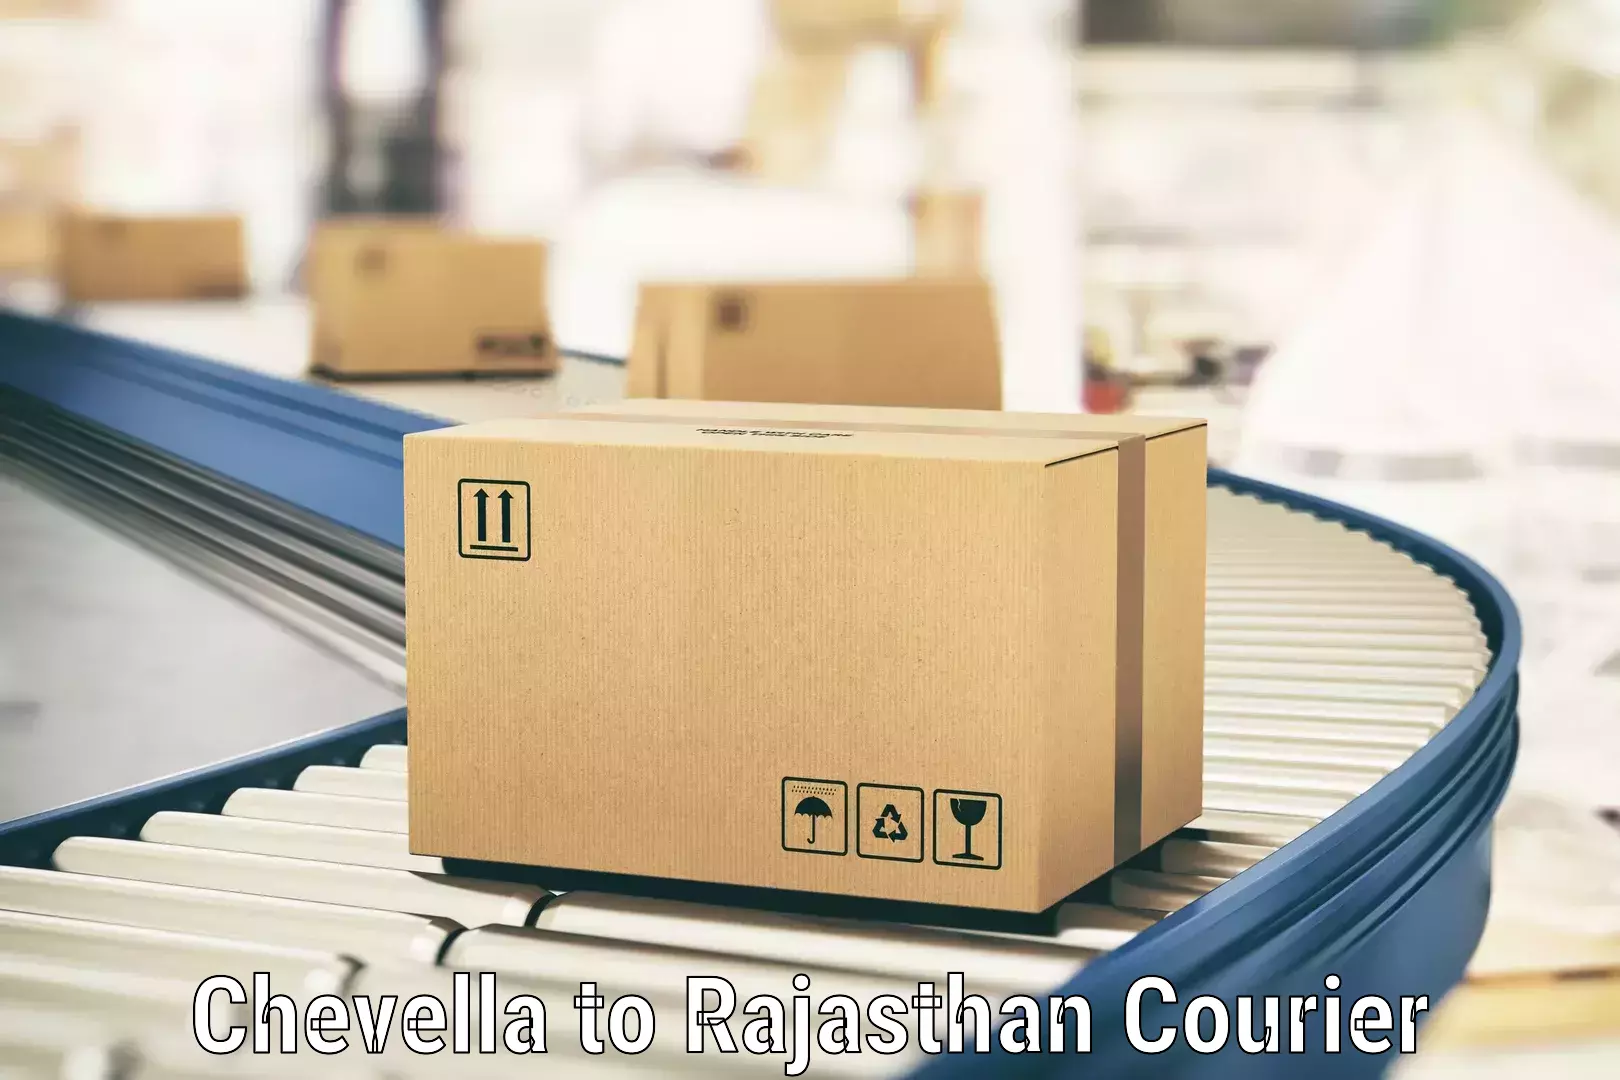 International courier networks Chevella to Udaipur